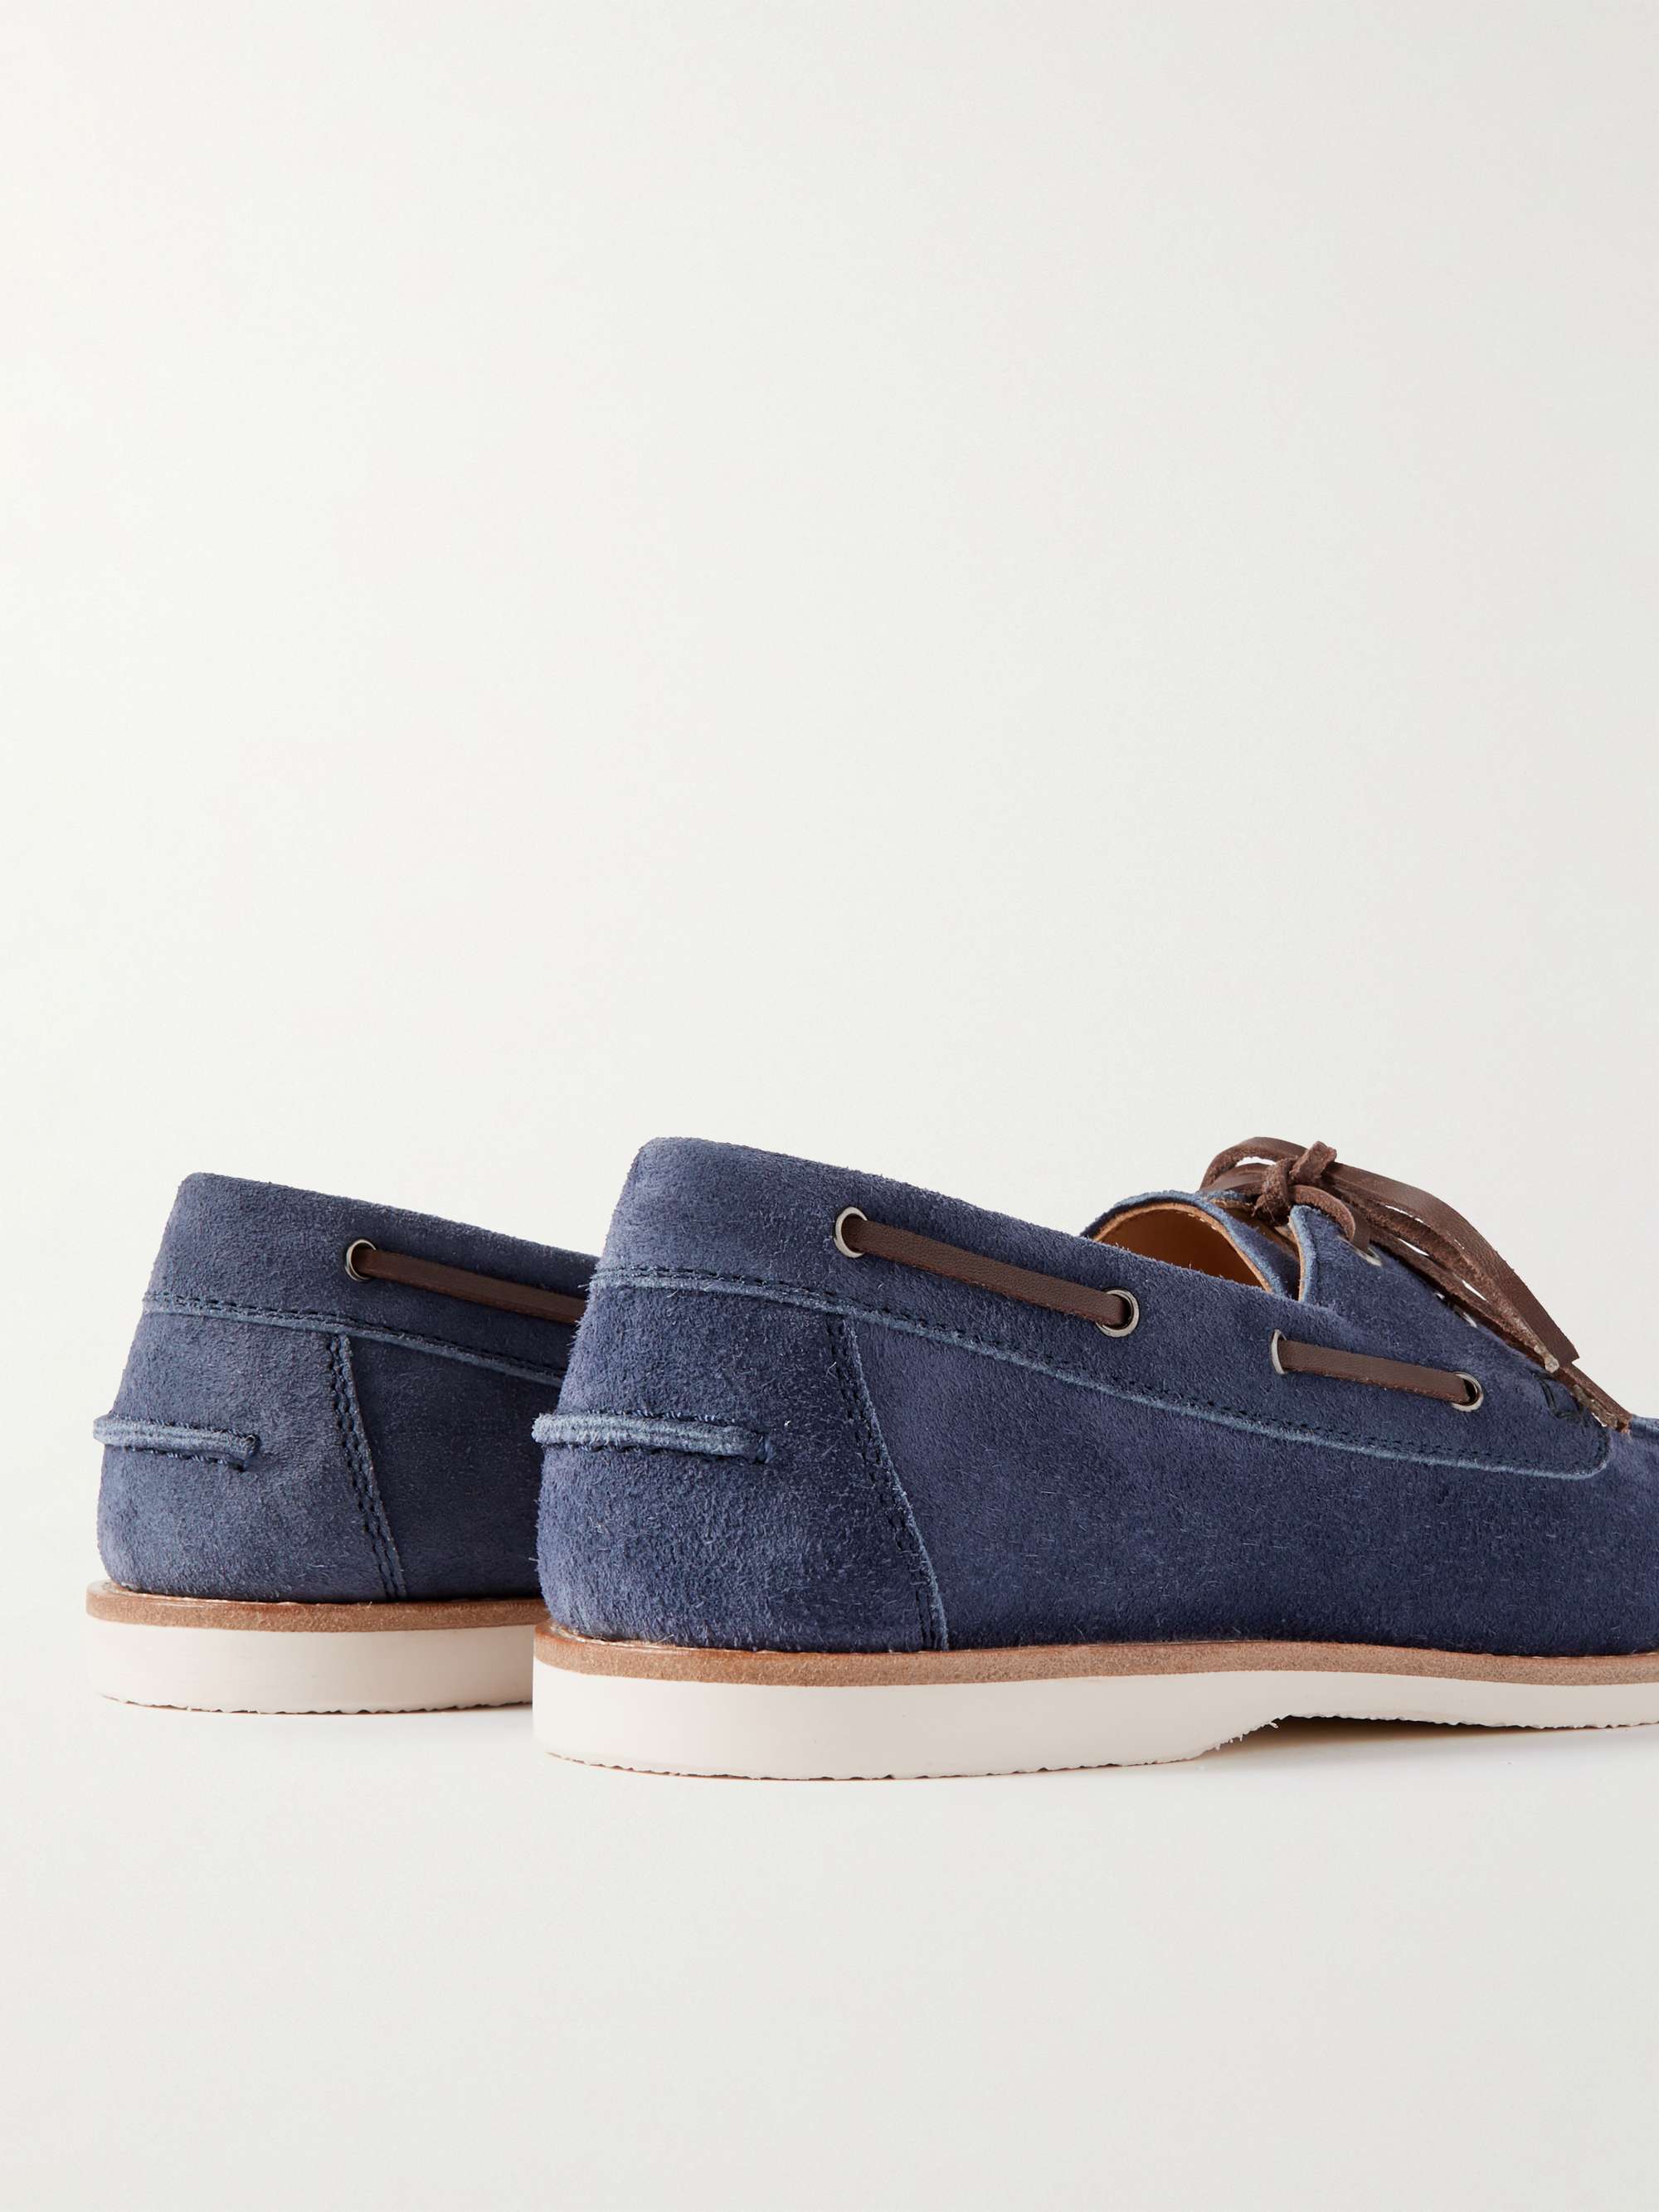 BRUNELLO CUCINELLI Leather-Trimmed Suede Boat Shoes